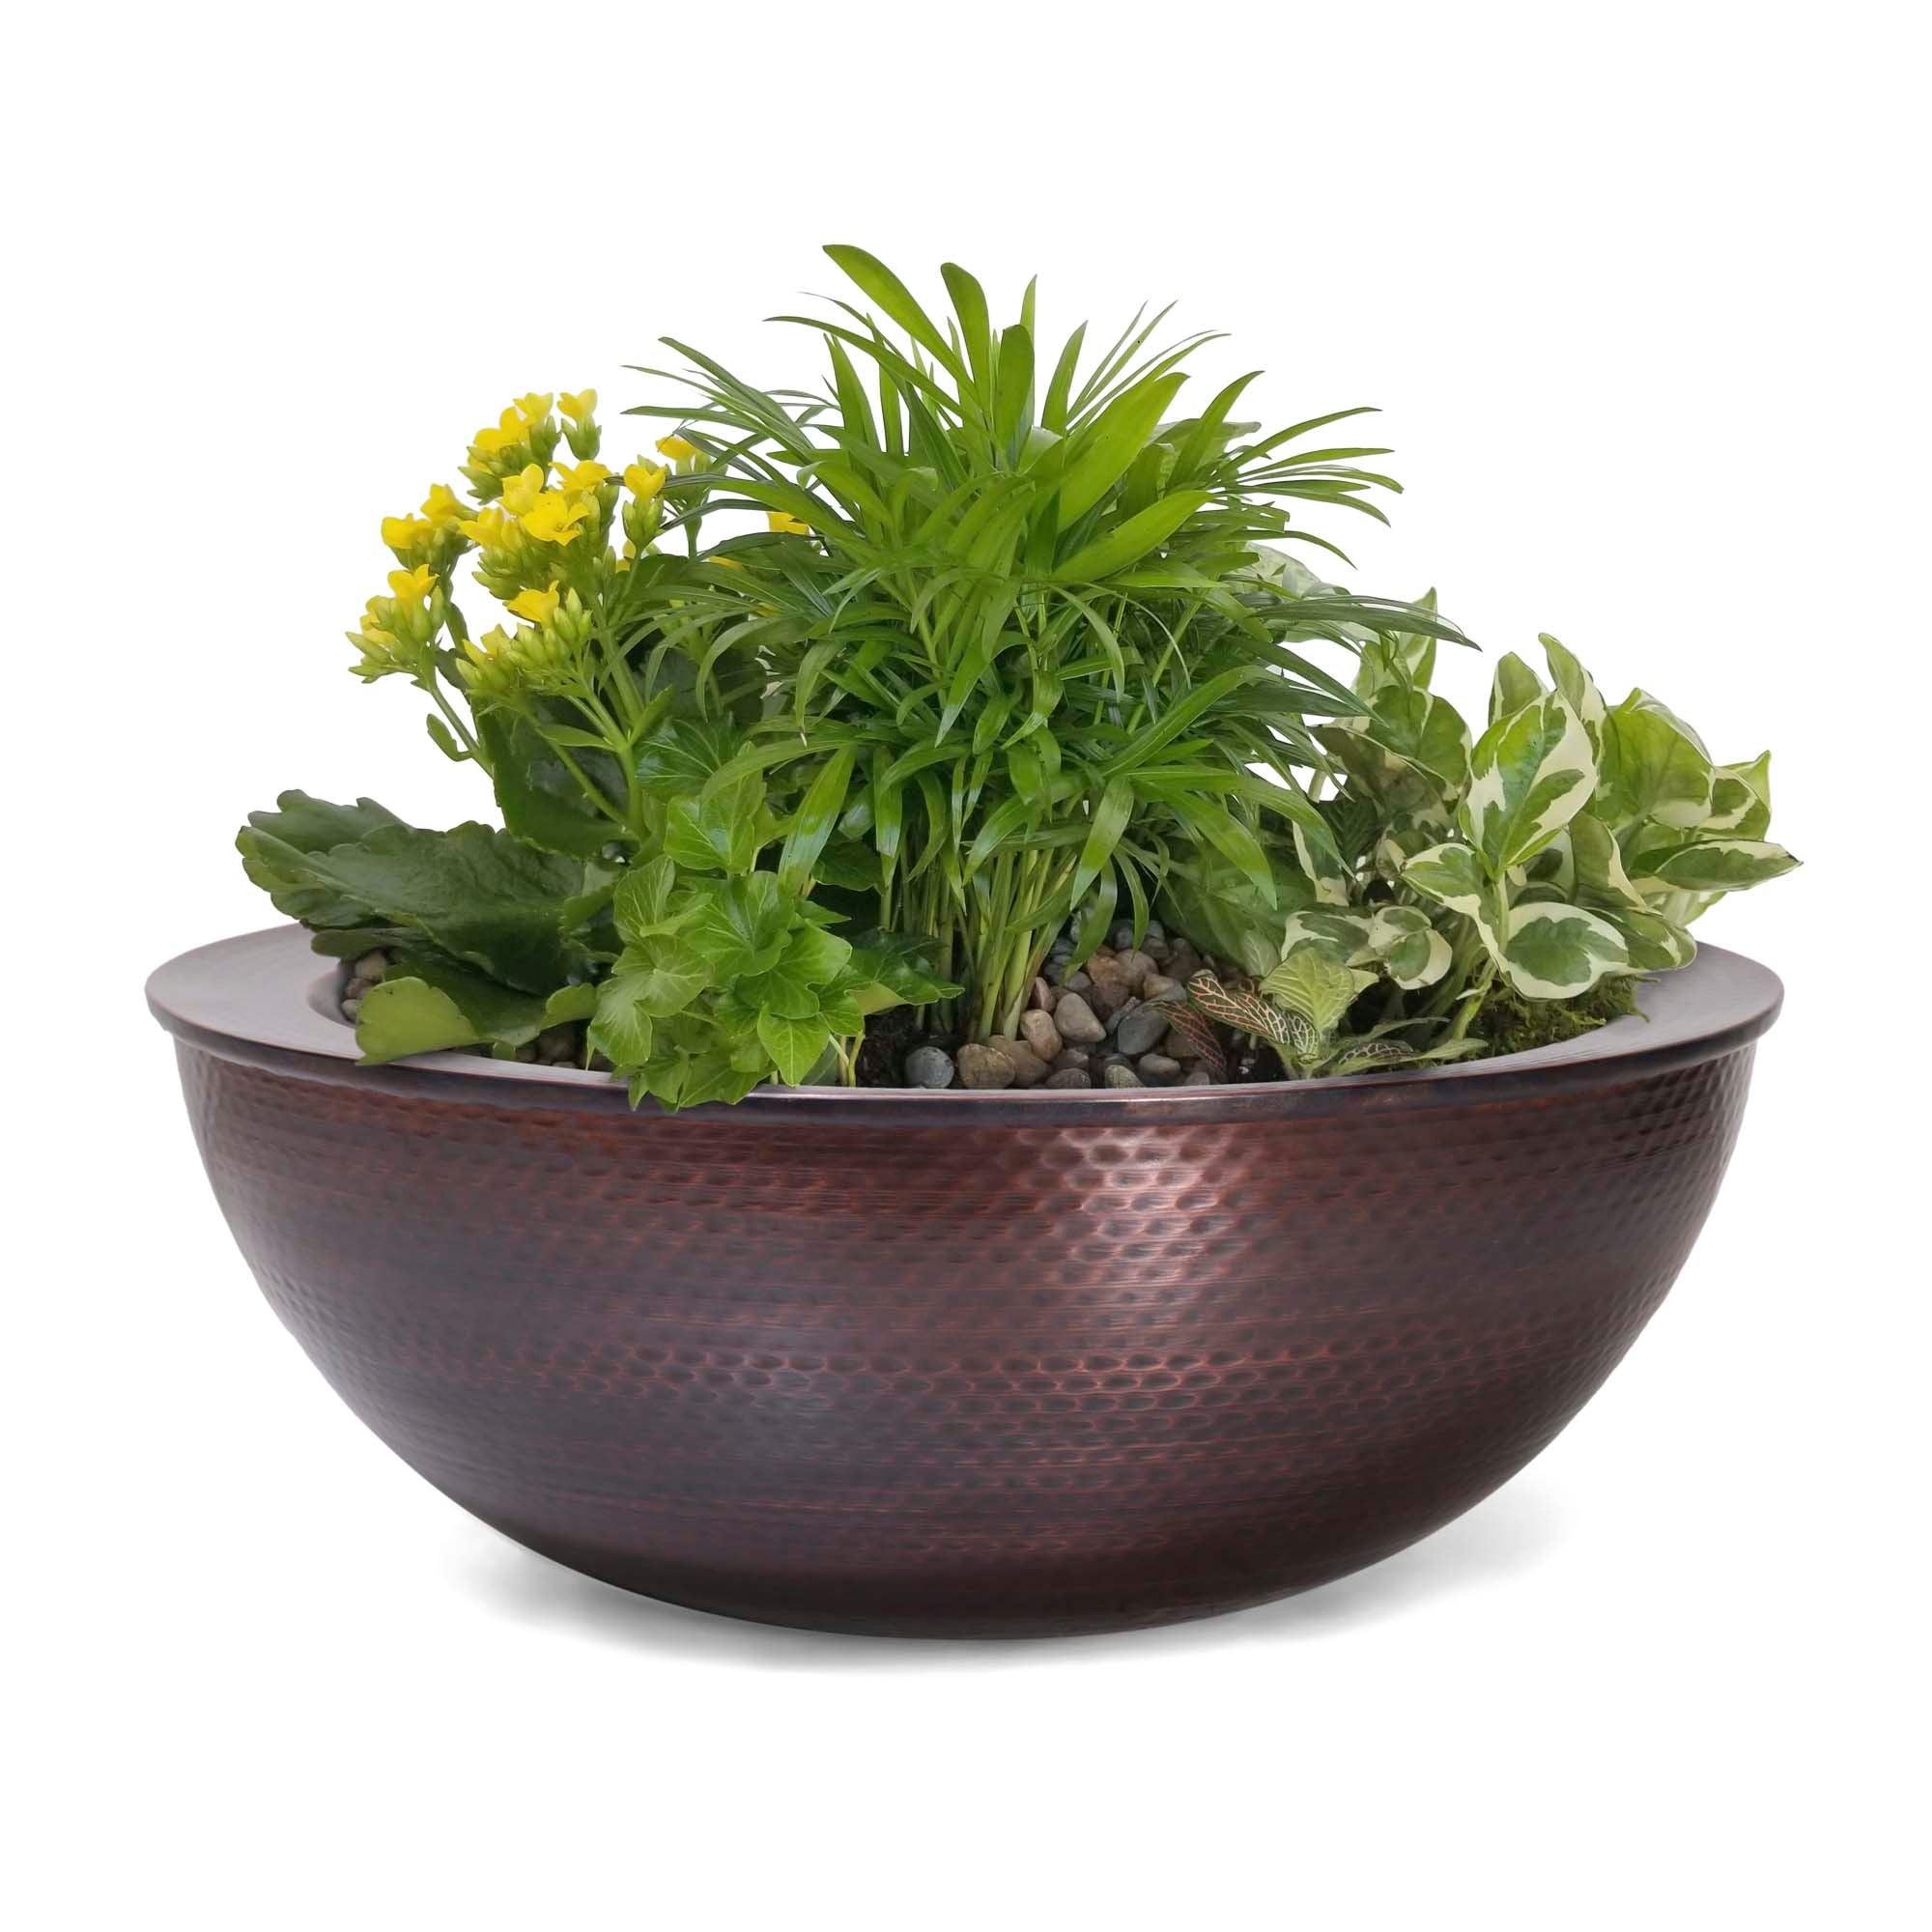 The Outdoor Plus Sedona Planter Bowl - Hammered Copper